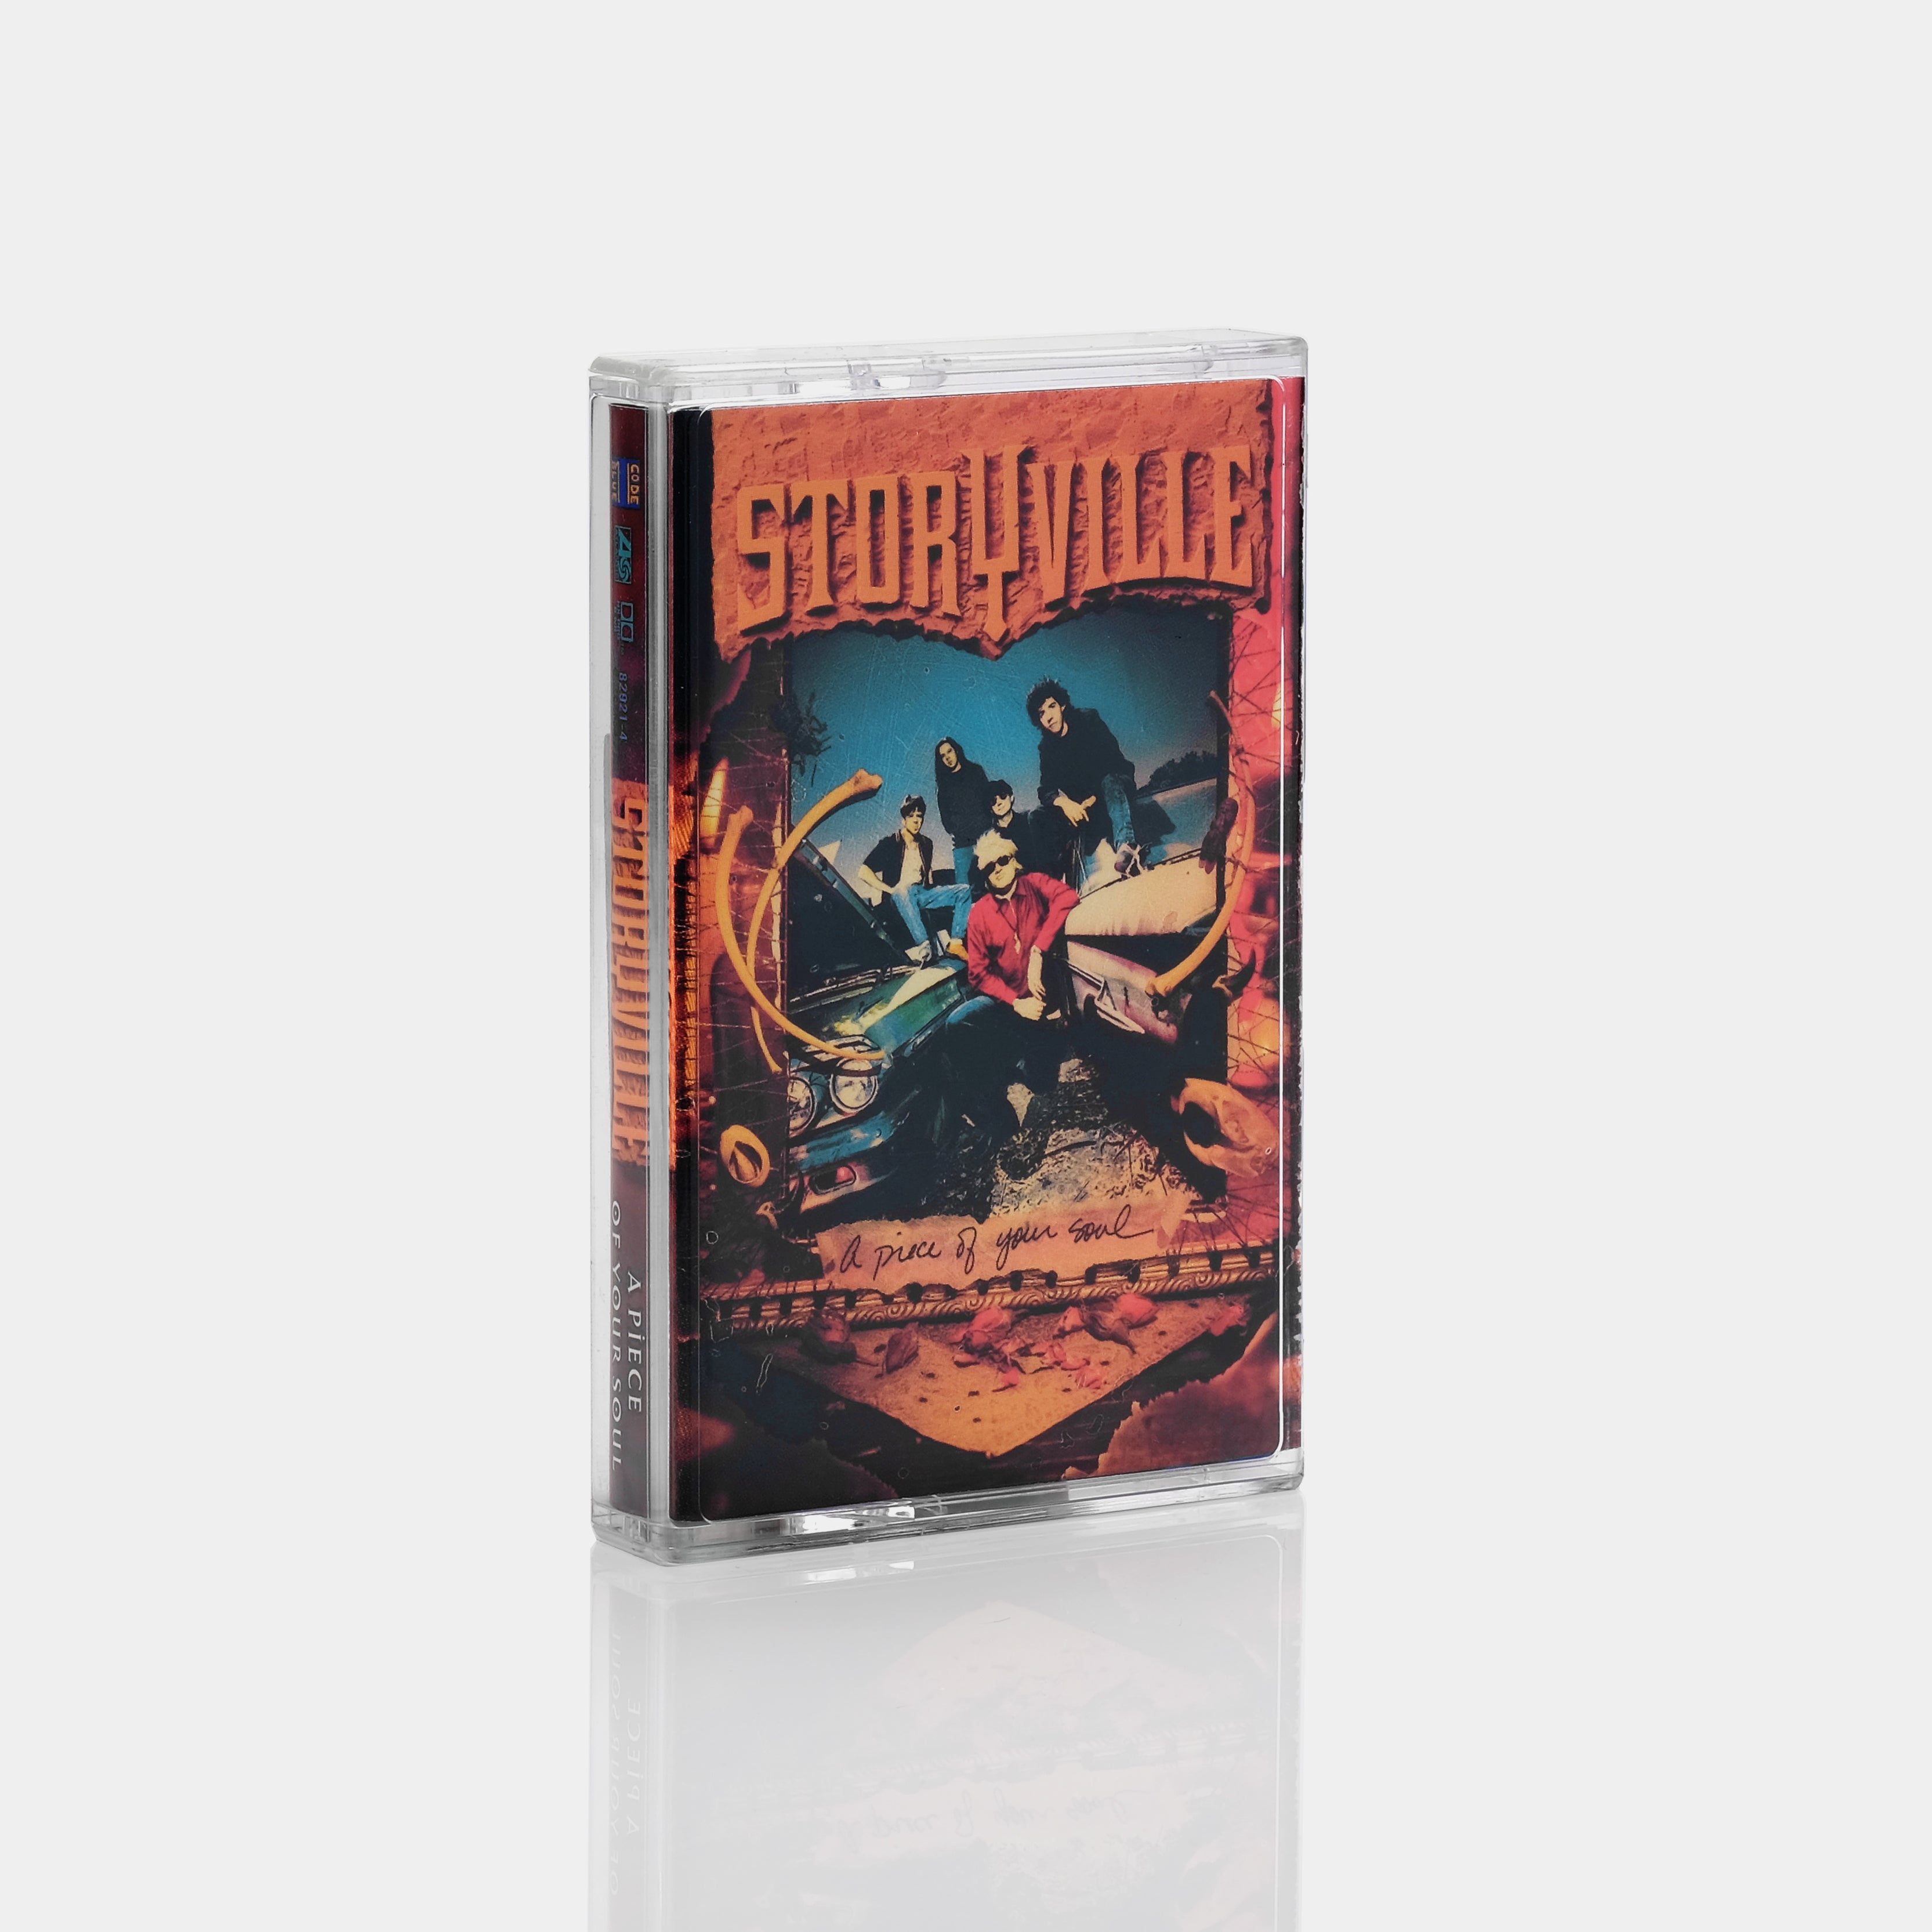 Storyville - A Piece Of Your Soul Cassette Tape